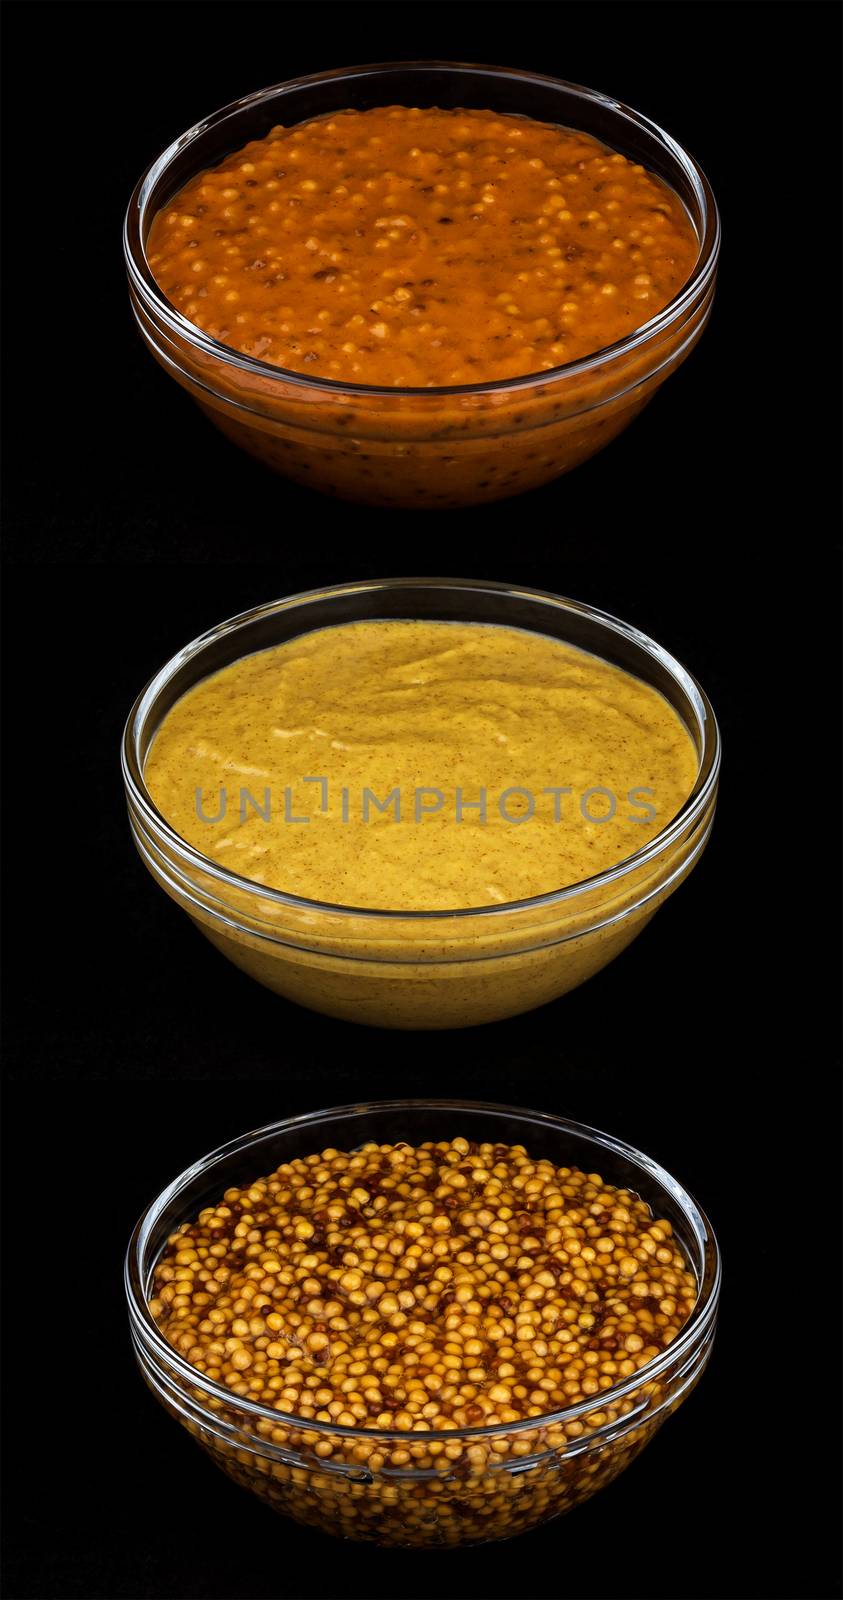 Set of different types of mustard by xamtiw